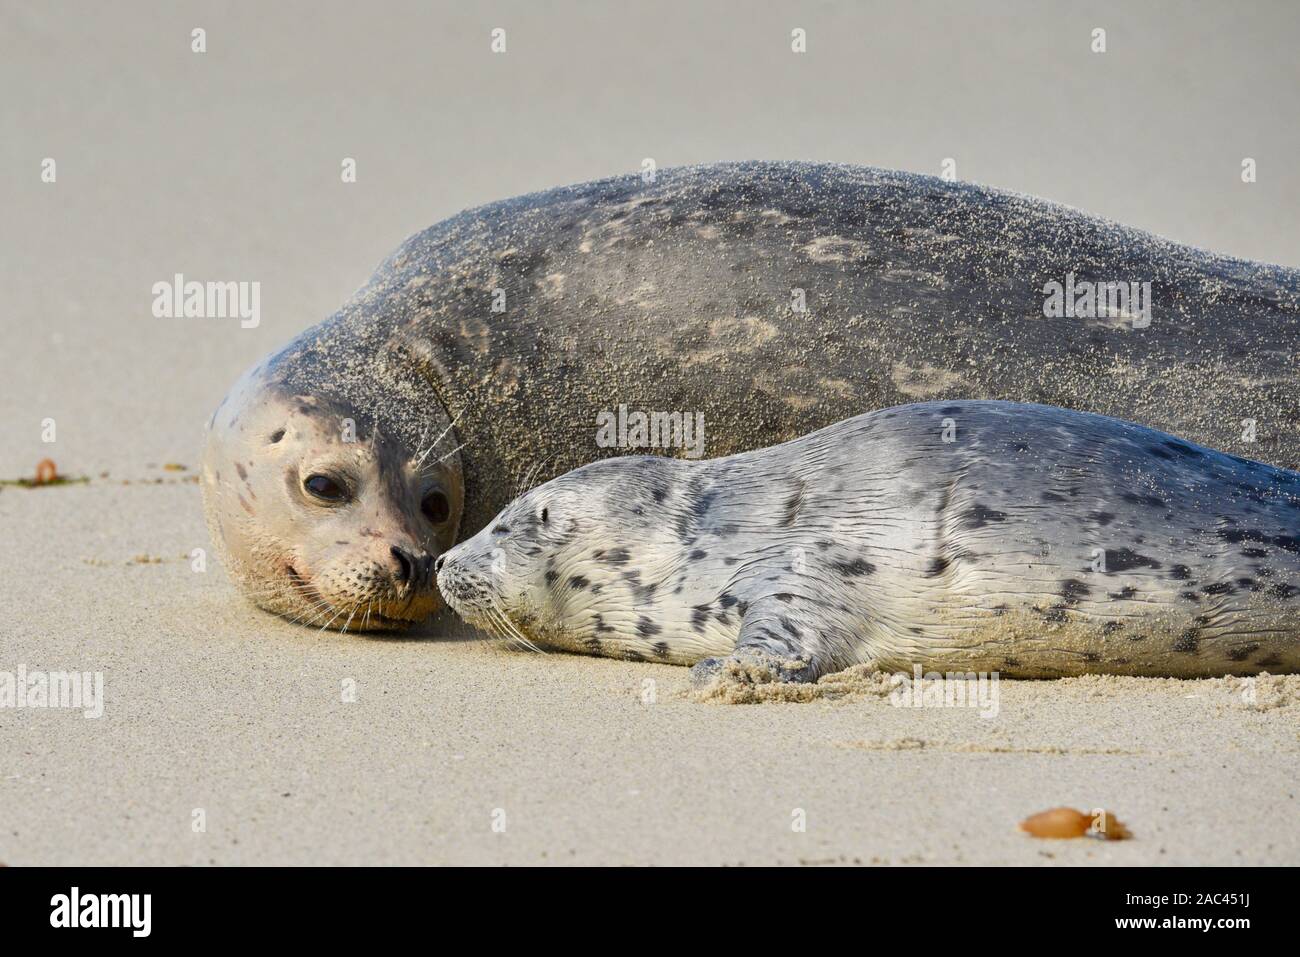 Wild Pacific harbor seal, mother and young pup, on beach in morning, La Jolla, San Diego, California, USA Stock Photo